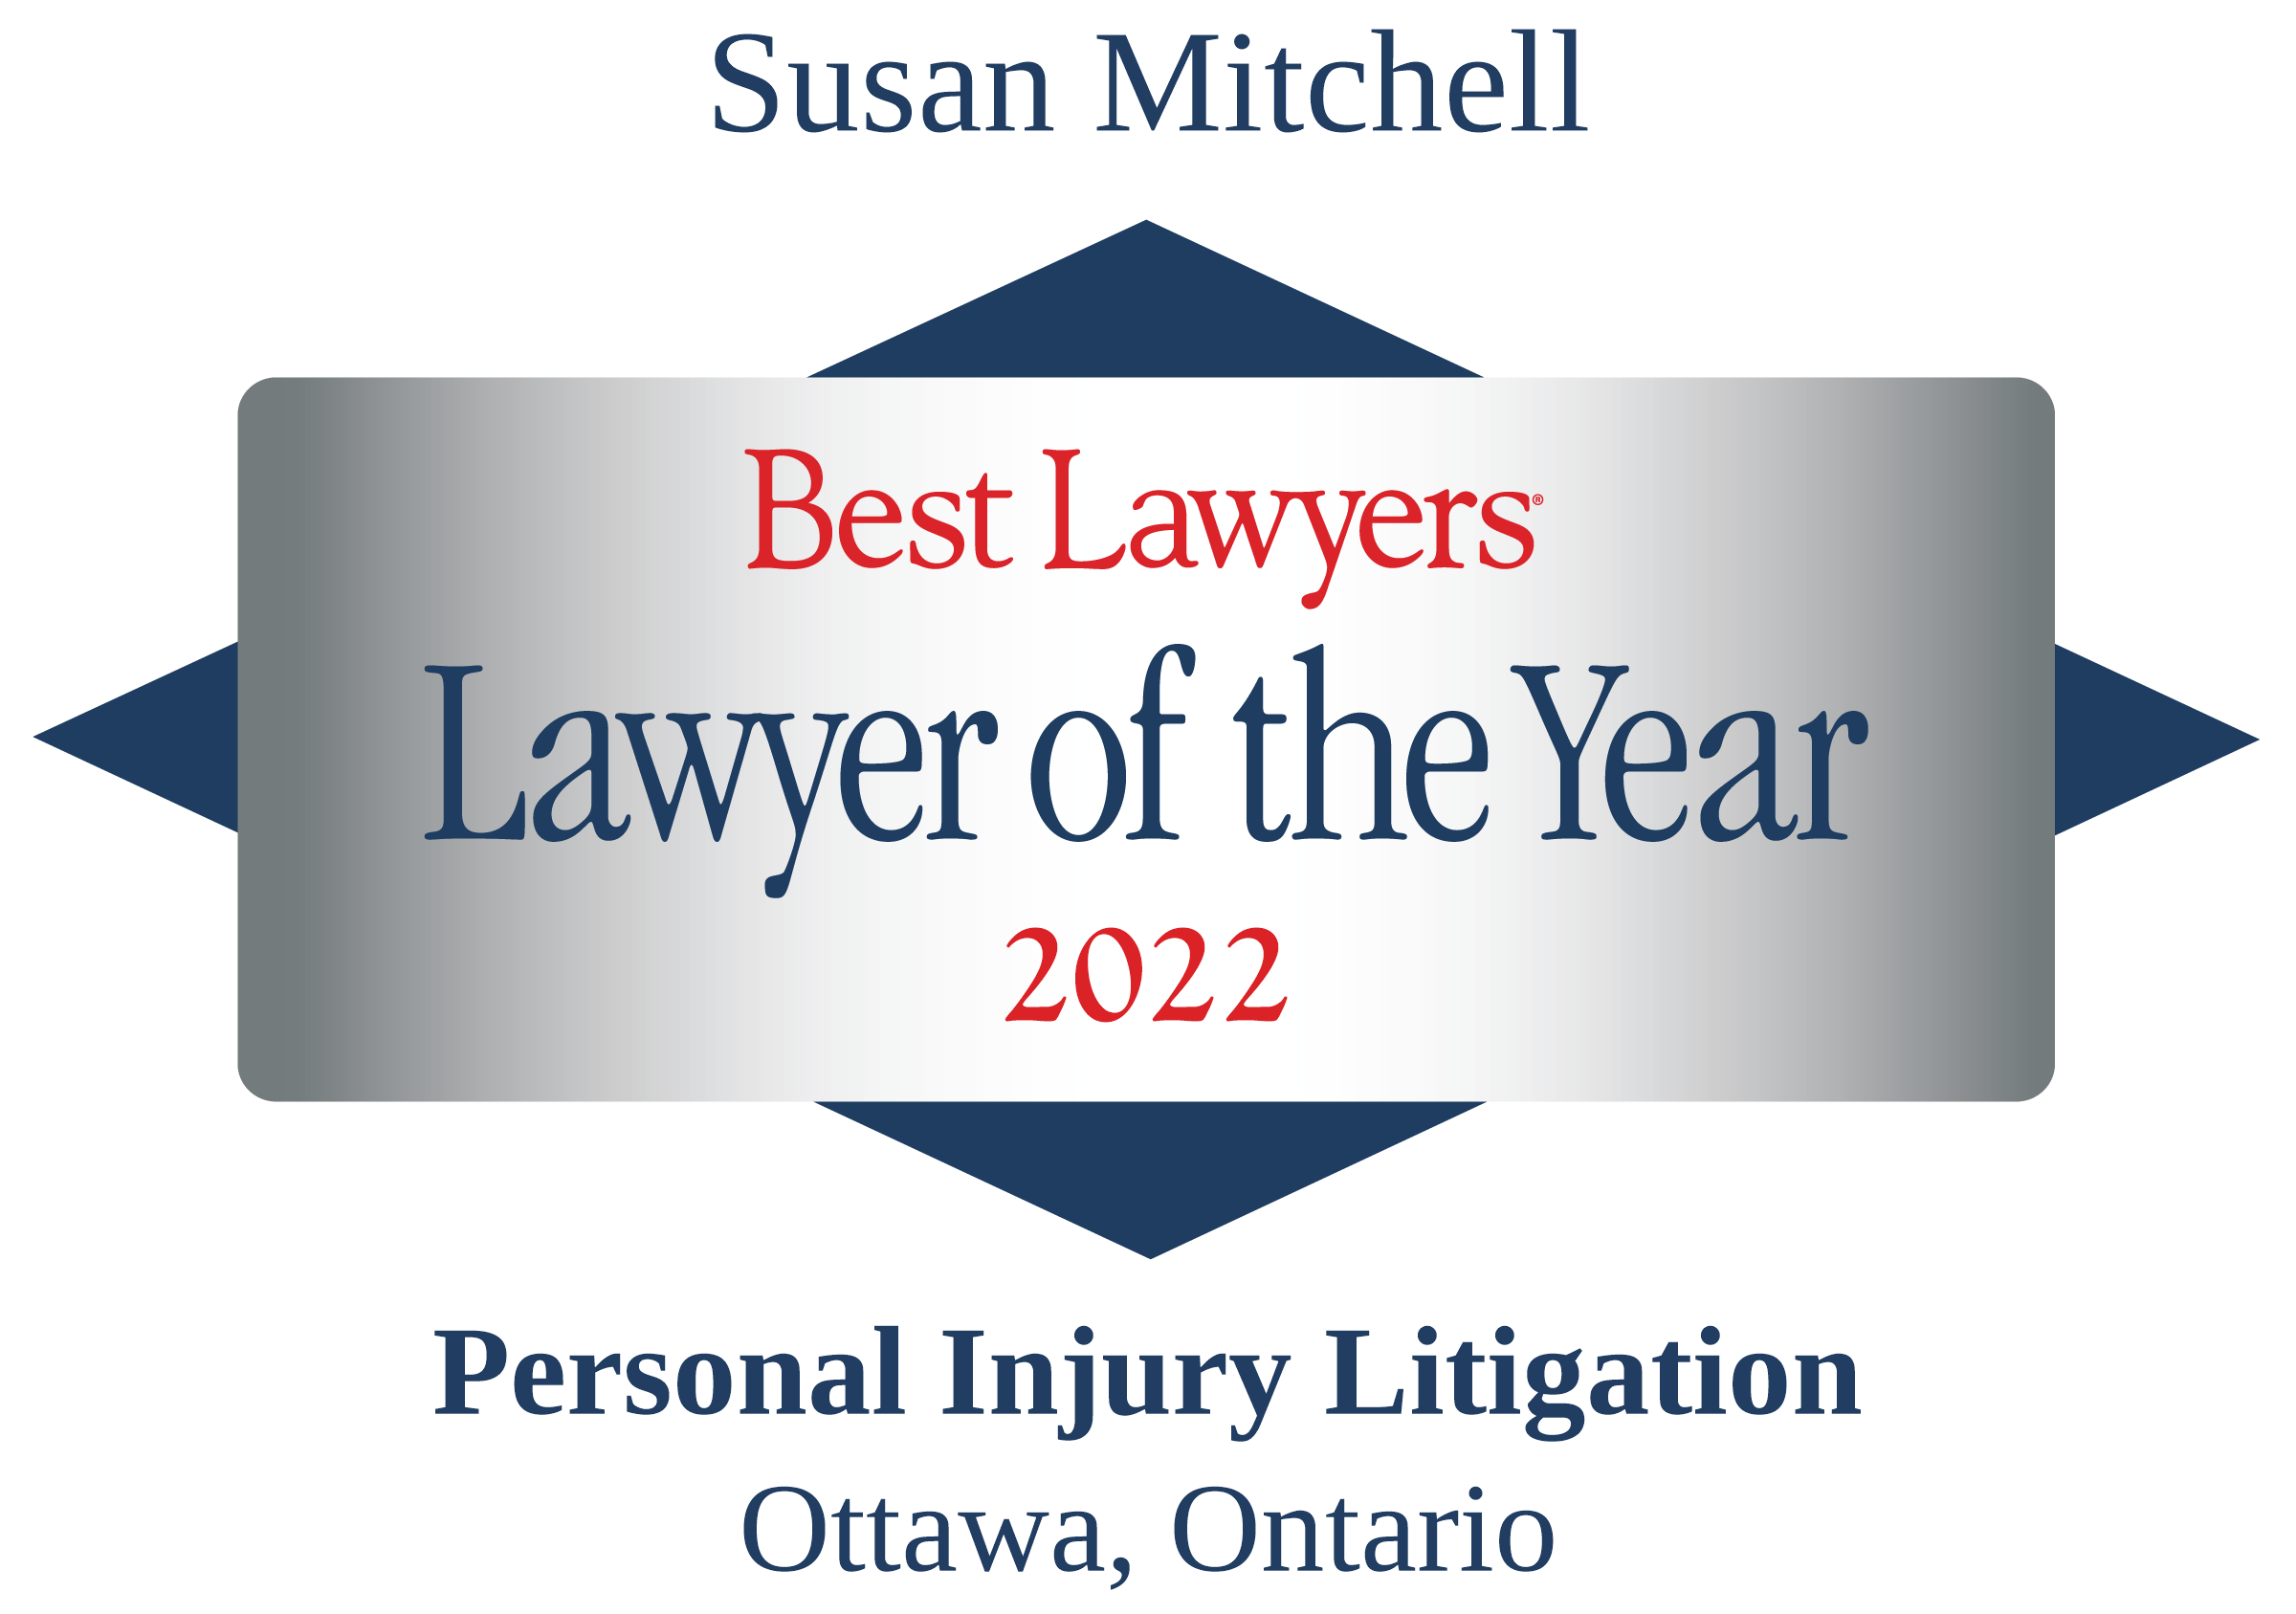 Award for Best Lawyer of the year, awarded to Susan Mitchell